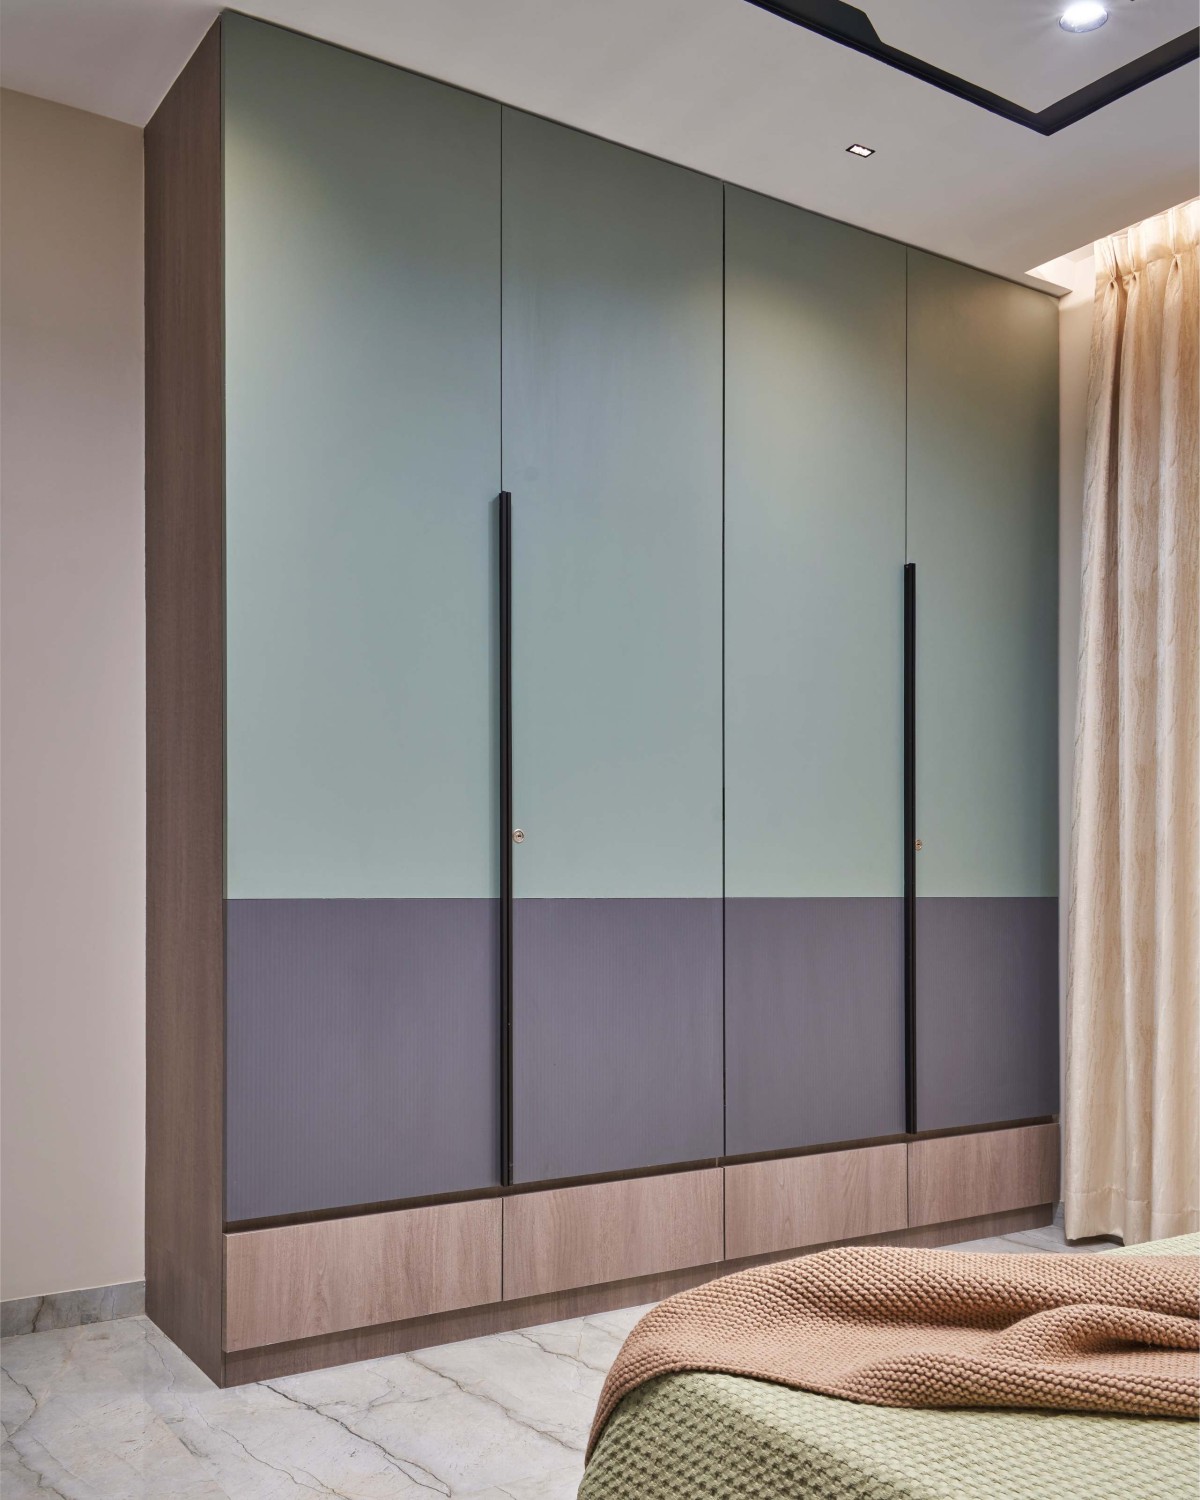 Wardrobe at Master Bedroom of Reviving Spaces by DNT Architects